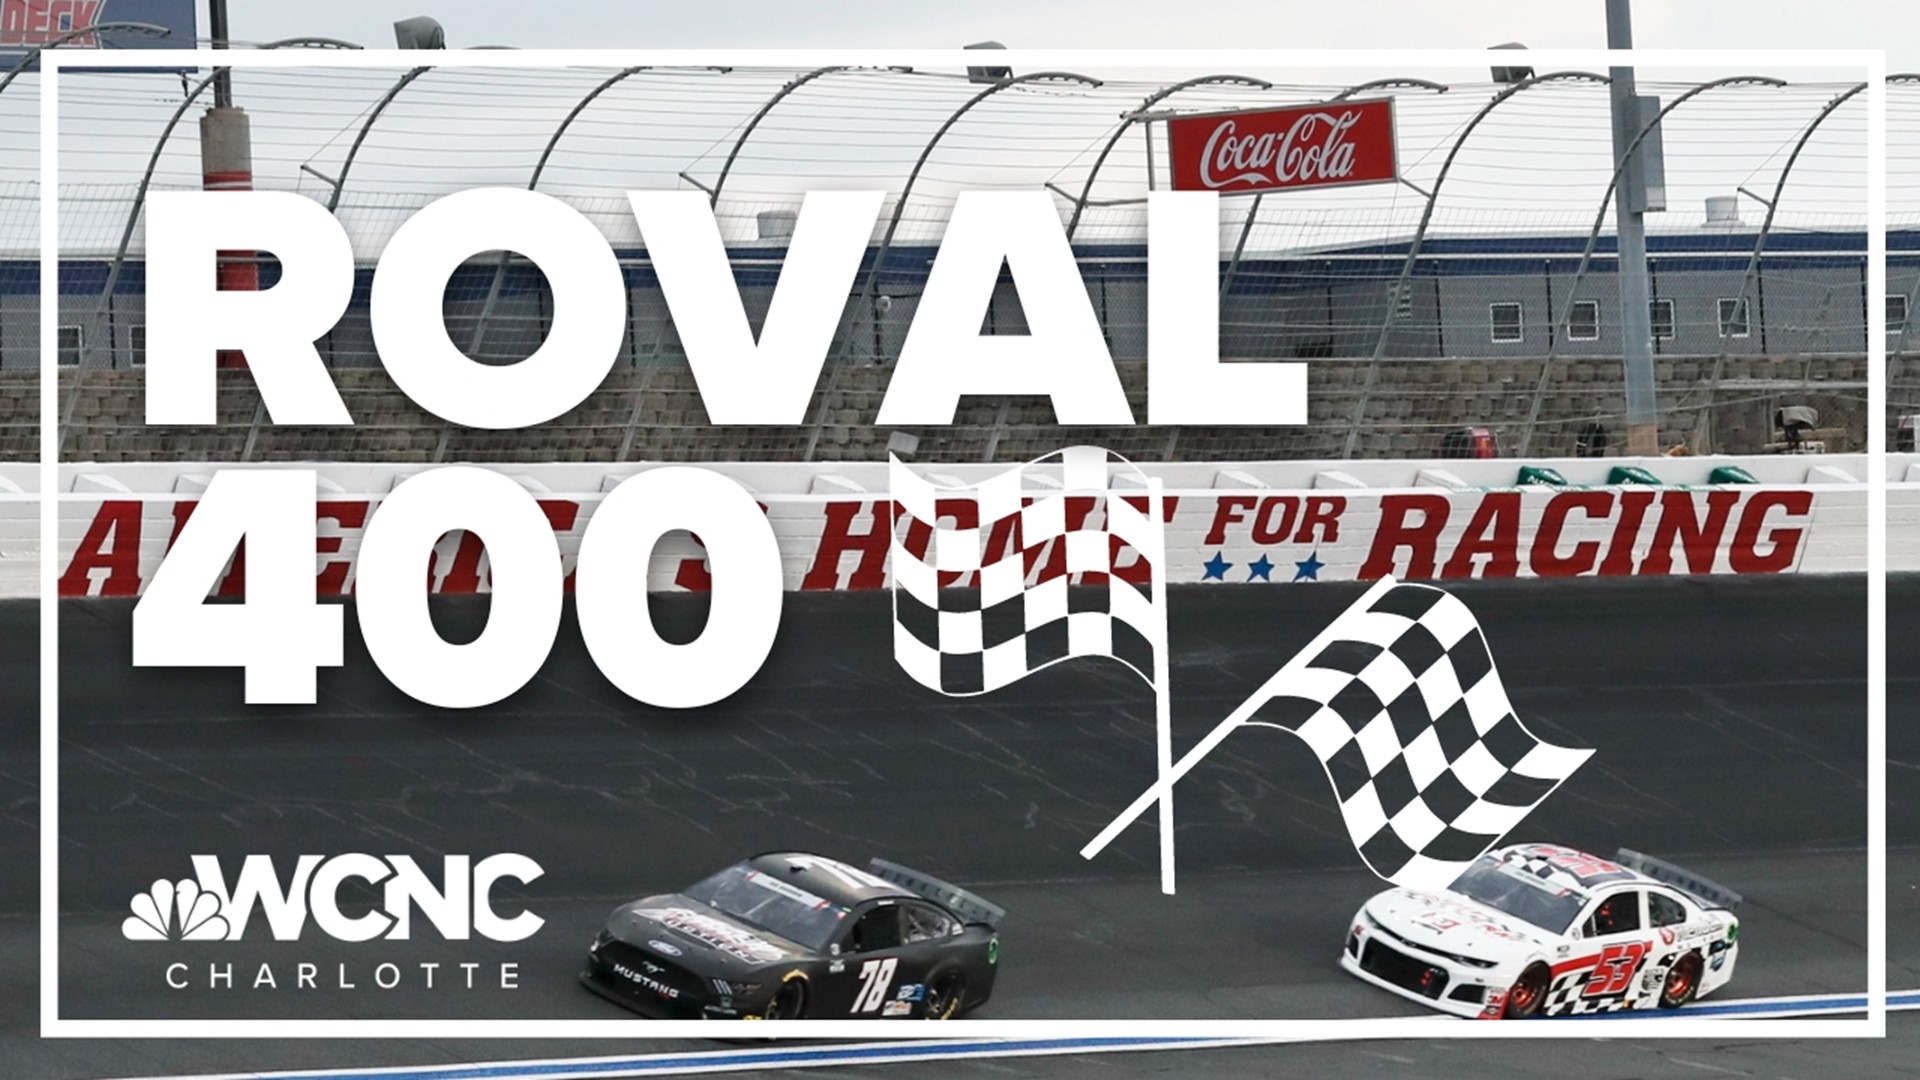 3 things to know about the Bank of America ROVAL 400 at Charlotte wcnc